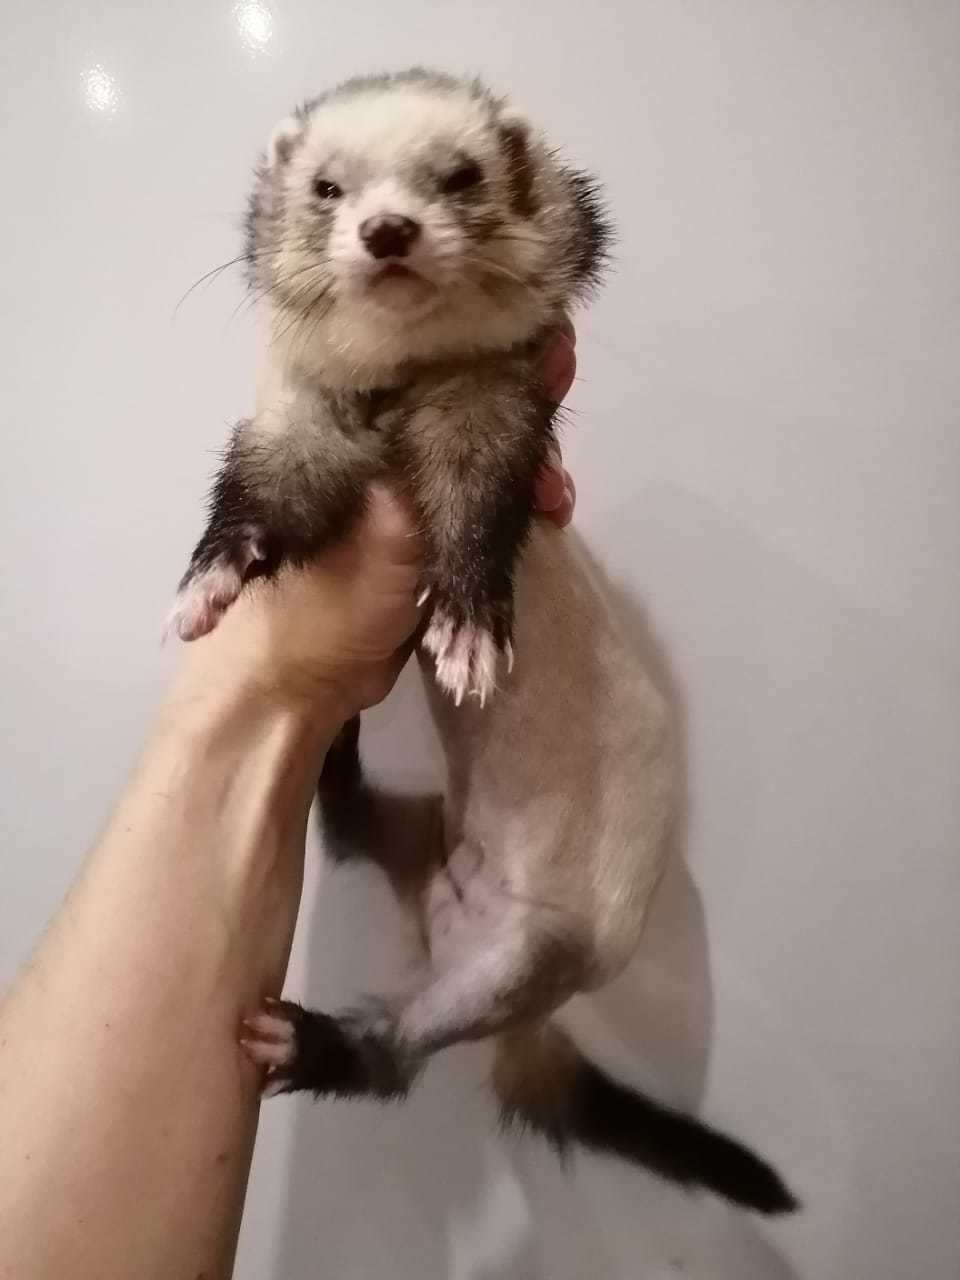 Charming Moon is in good hands! [Taken] - Ferret, Moscow, In good hands, Animal protection, No rating, Longpost, Moscow region